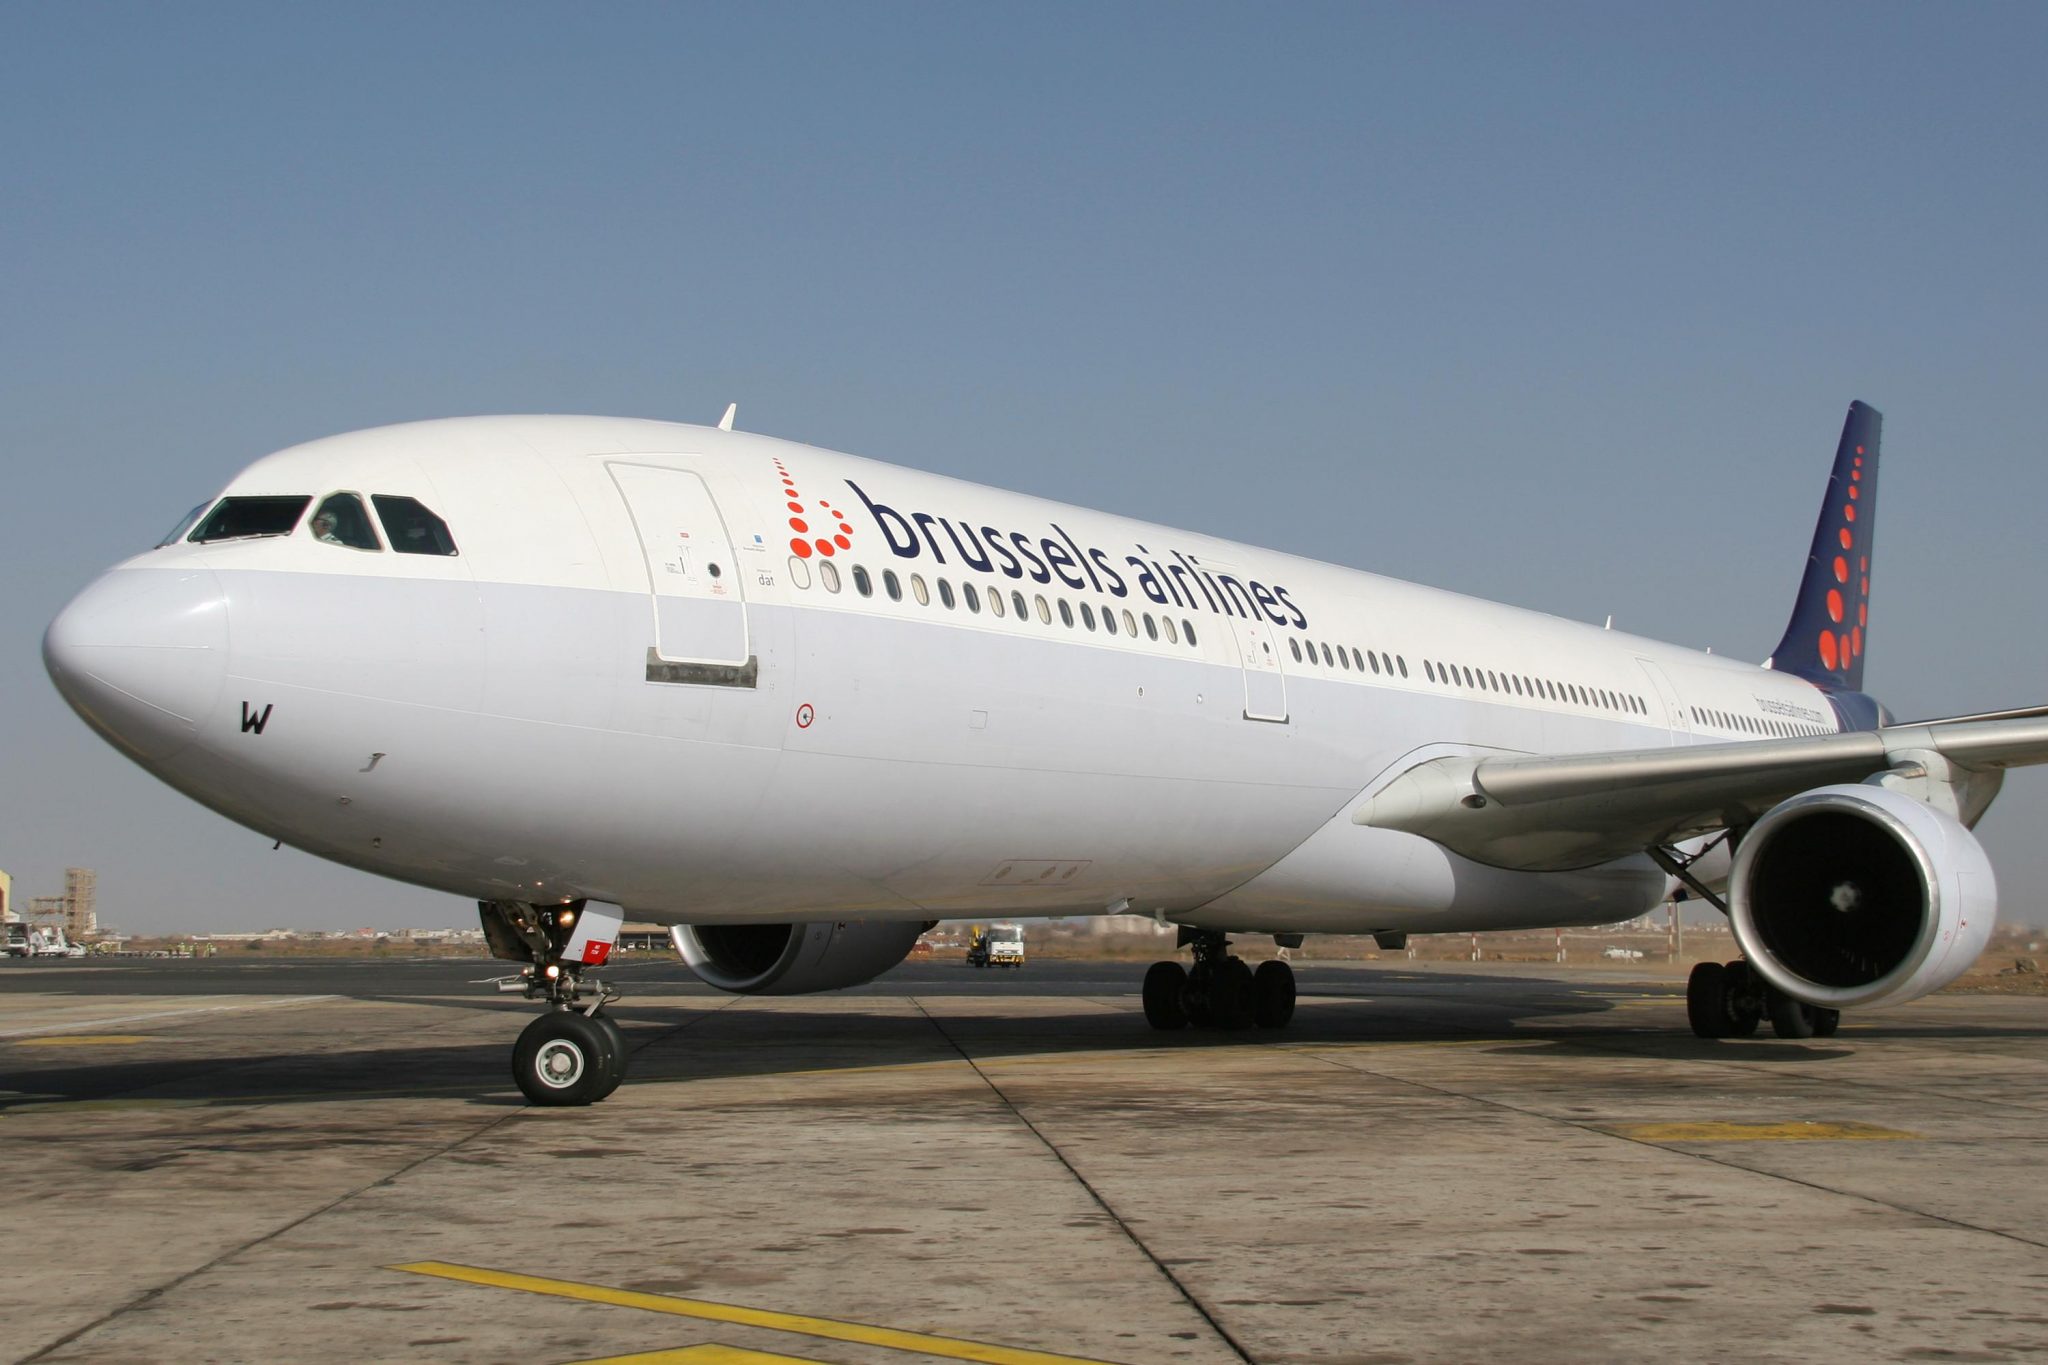 New Head of Corporate Communications at Brussels Airlines